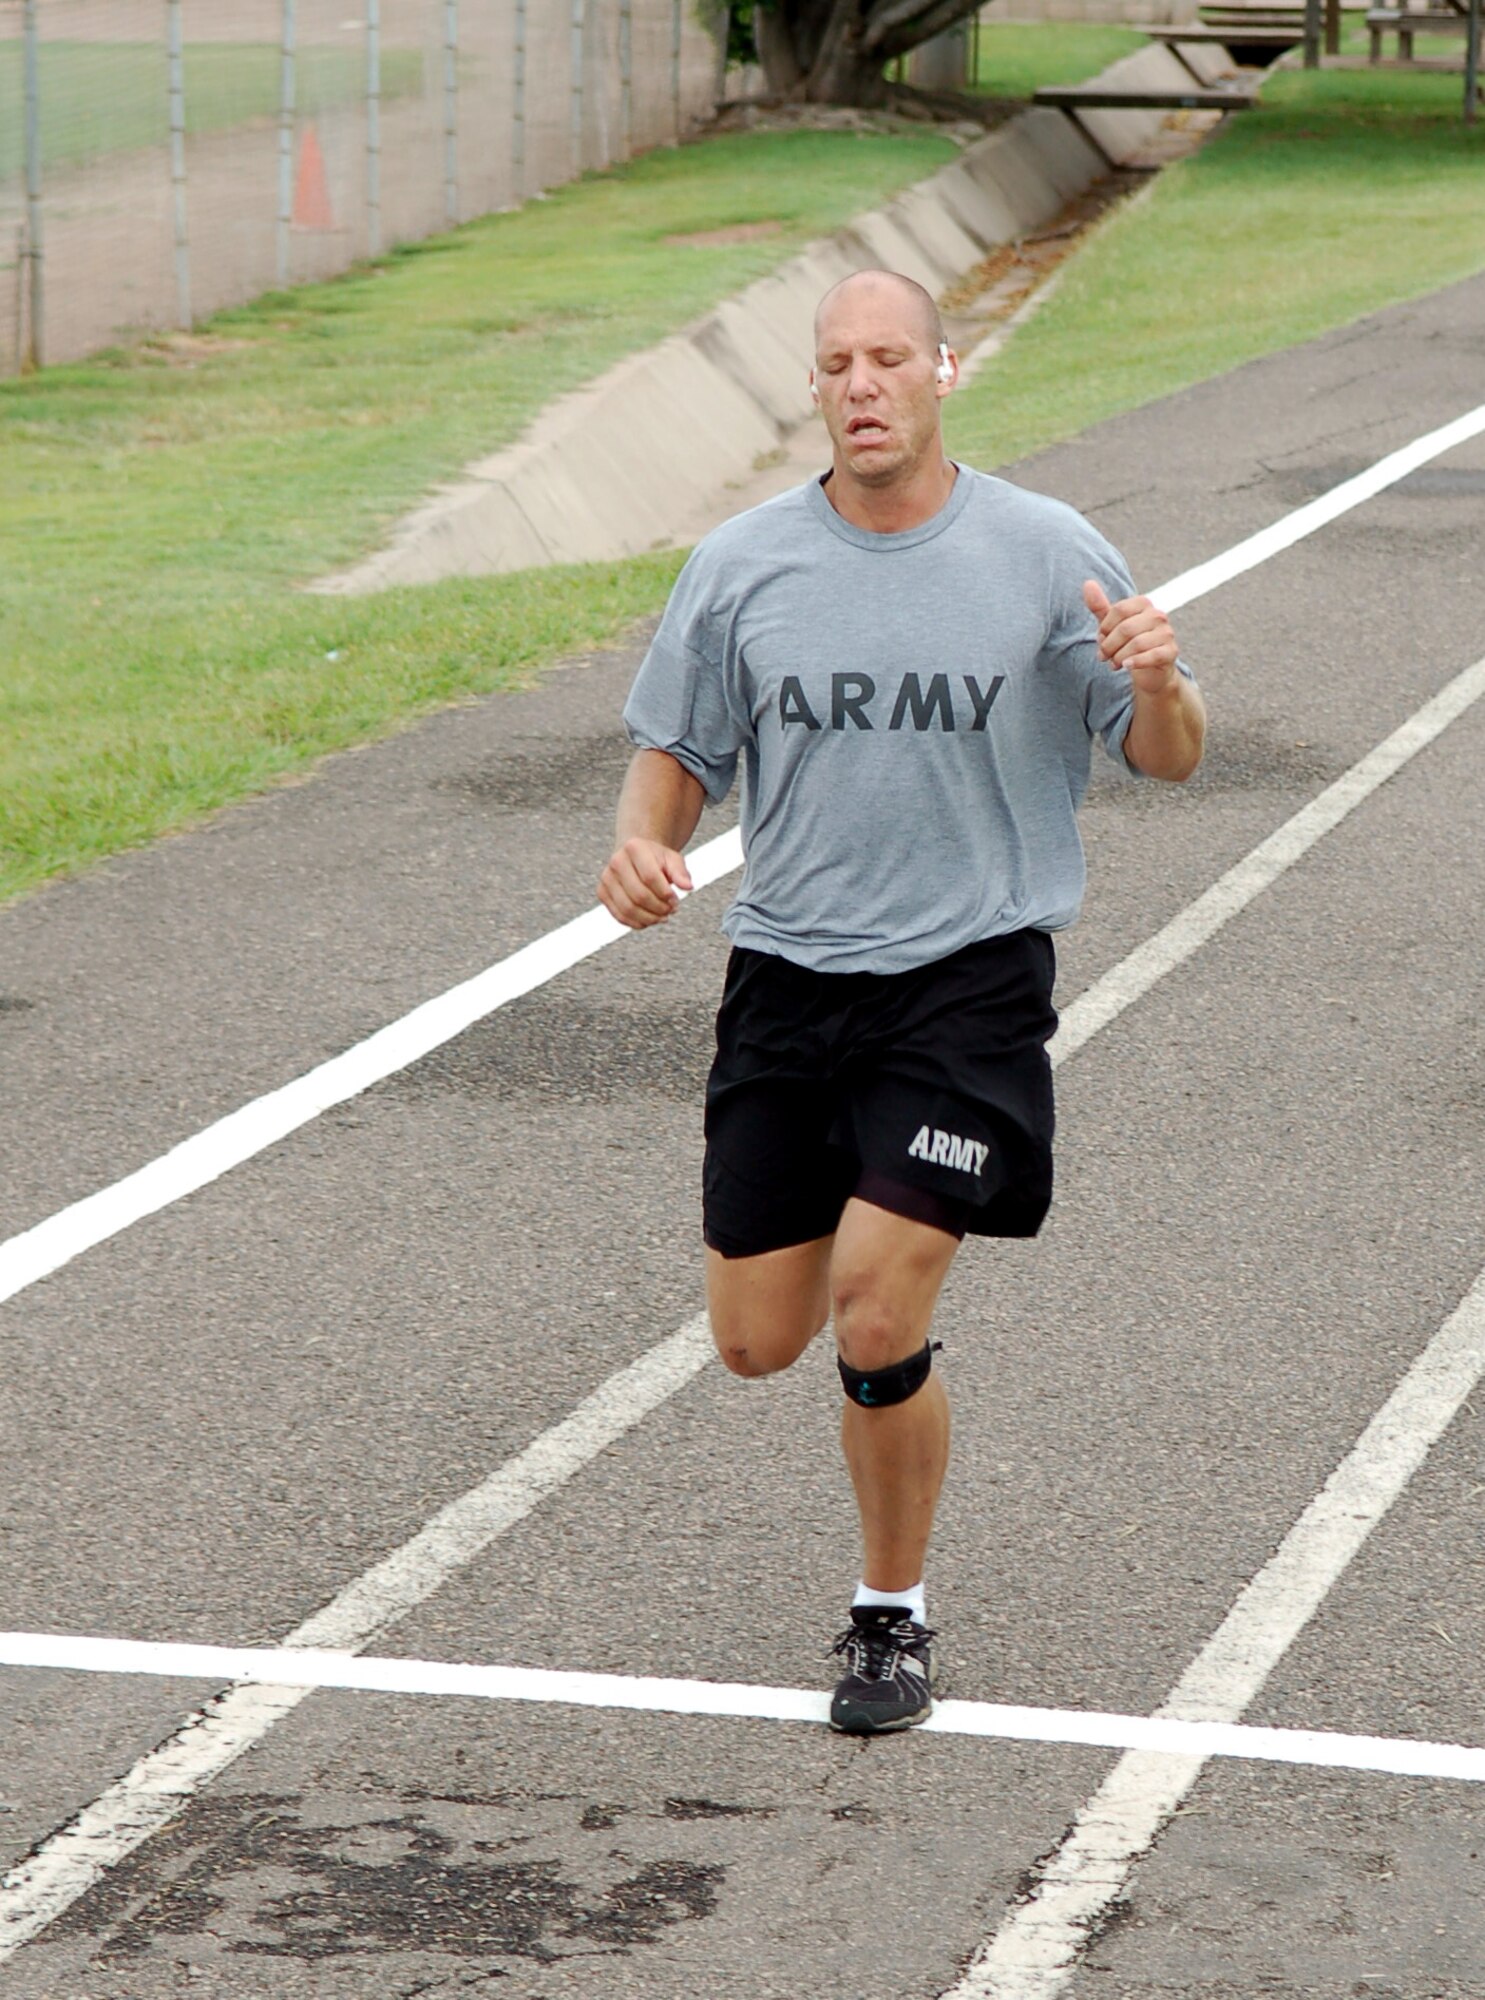 SOTO CANO AIR BASE, Honduras – In the last few moments of the Joint Task Force-Bravo POW/MIA Remembrance Run, Army Sgt. Pete Schaffer reaches his self-designated finish line, having completed 29.5 miles over the entire duration of the event.  A total of approximately 170 participants ran in mostly 15-minute intervals for 24 hours to show support for their fellow servicemembers who have been listed as POW/MIA.  (U.S. Air Force photo by Staff Sgt. Austin M. May)